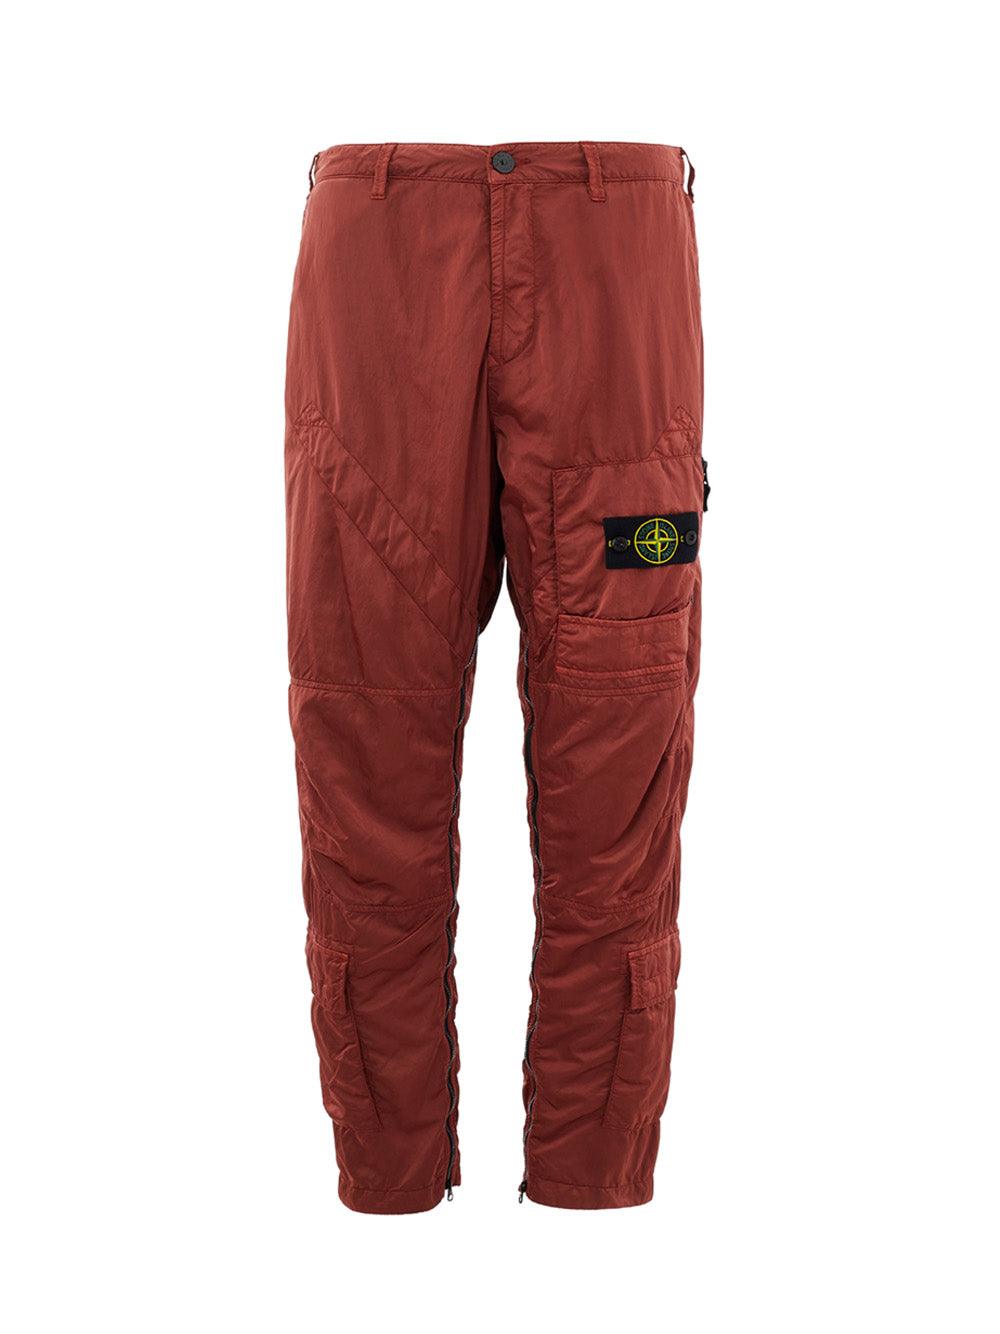 Stone Island Cargo 'Helicopter' Trousers - Ellie Belle